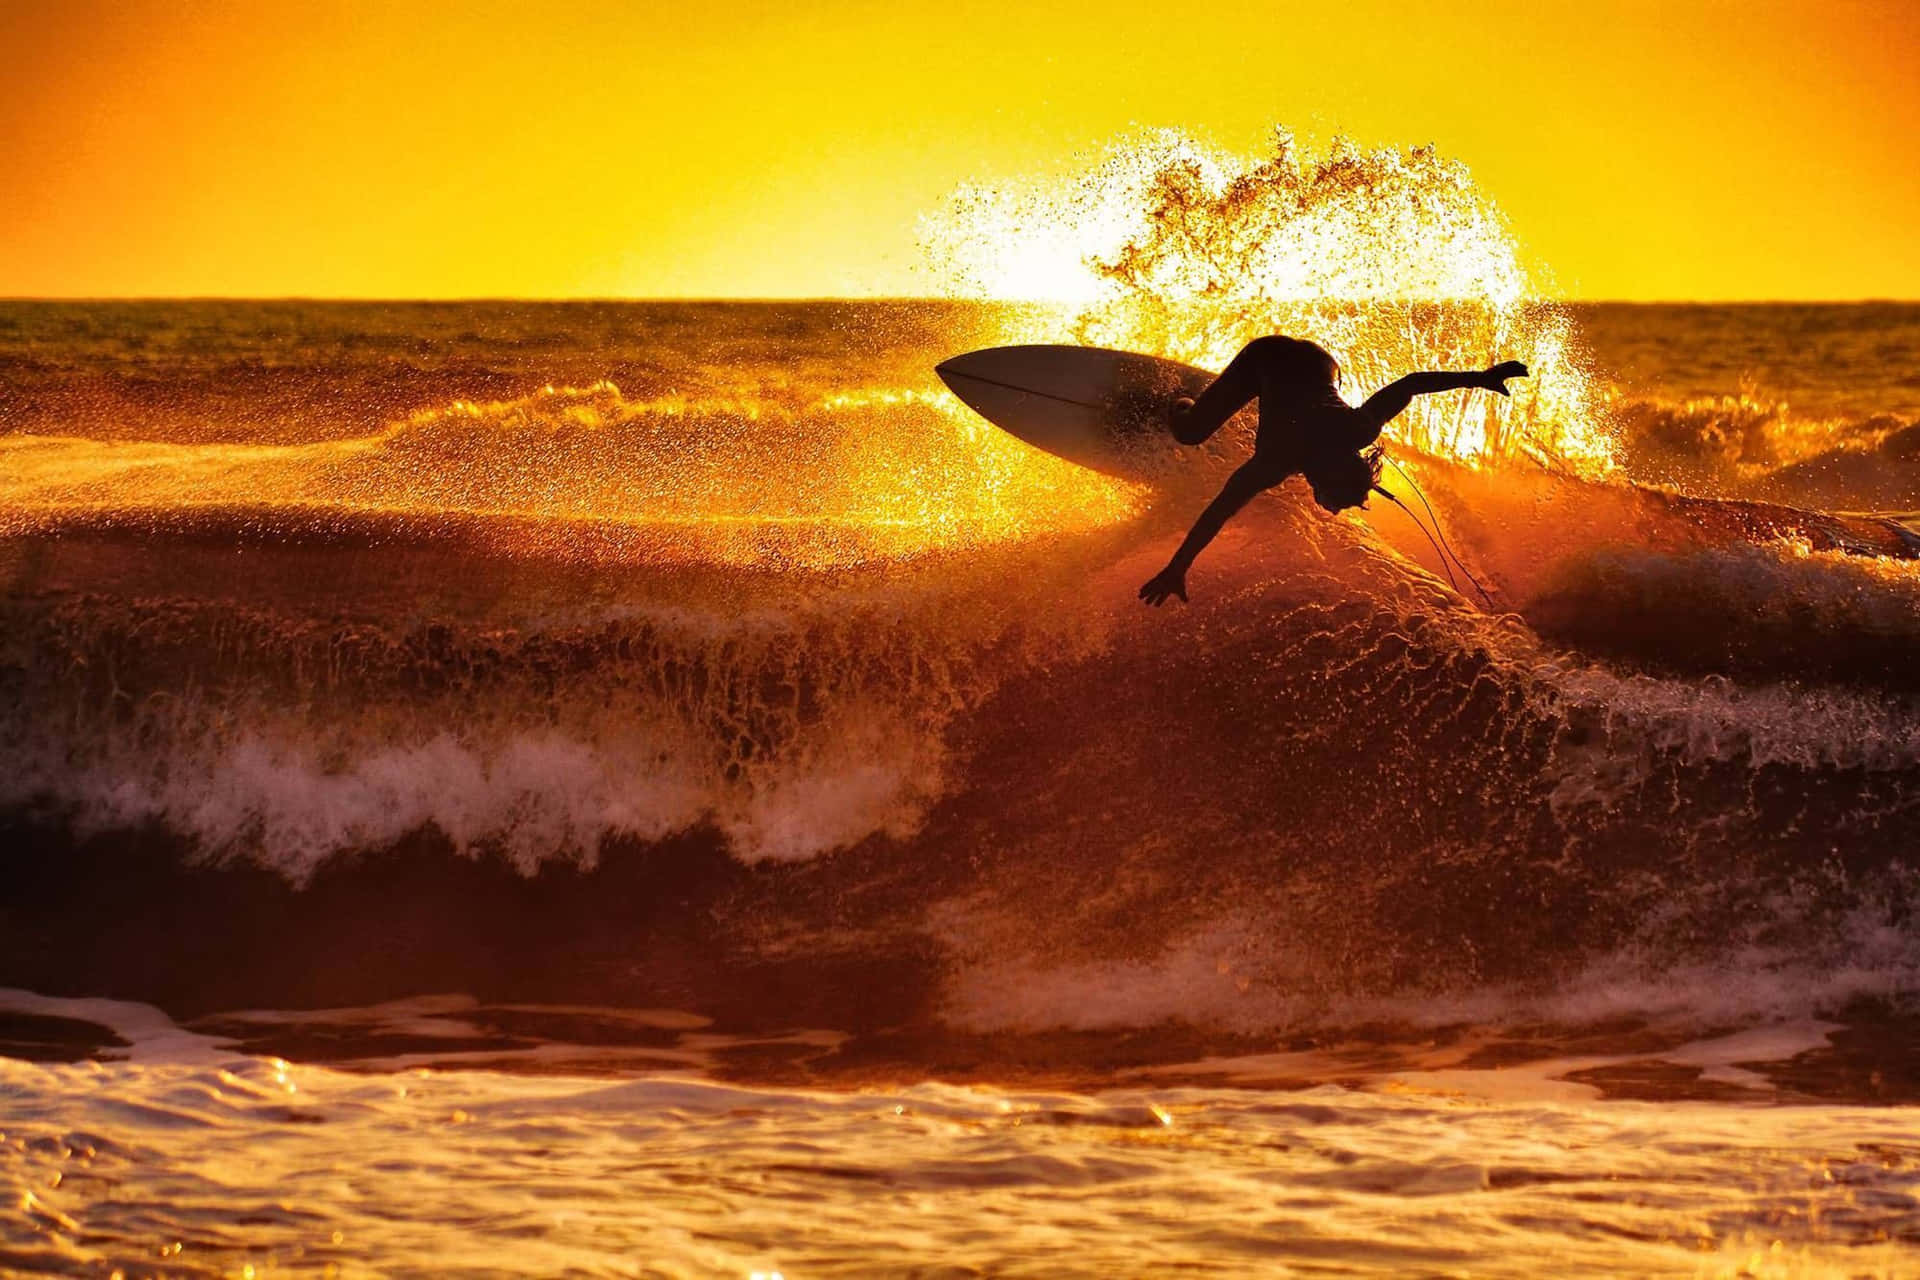 Cool Surfer Move Sunset Beach Picture